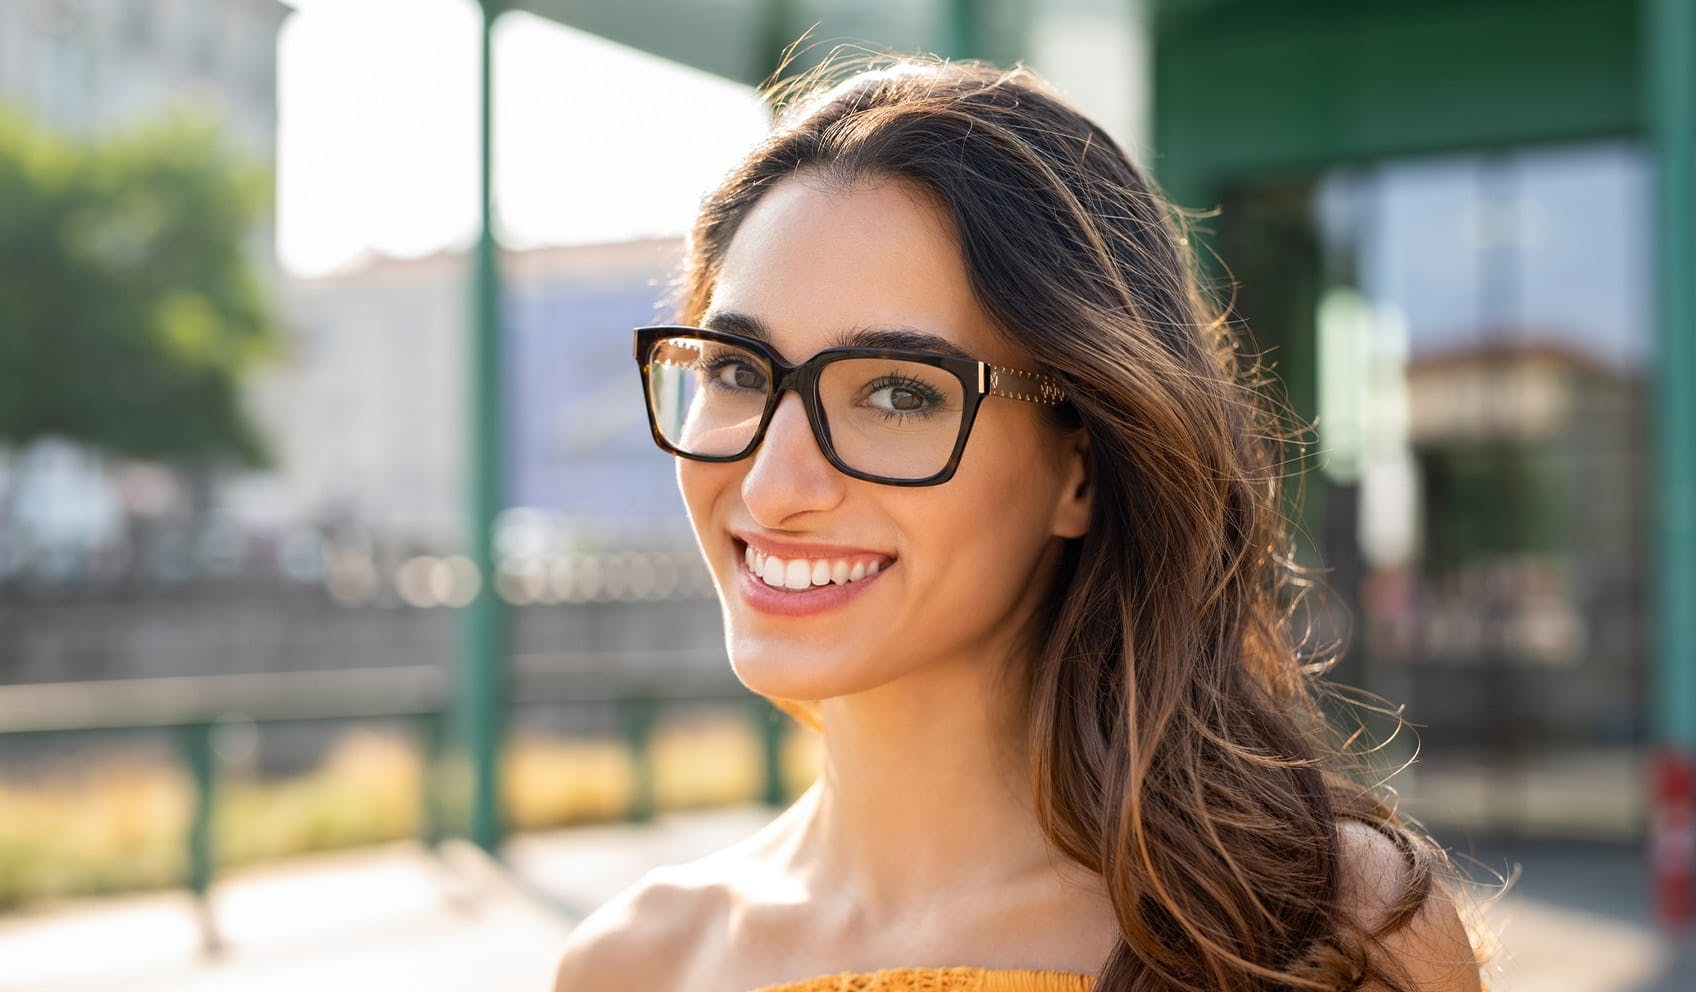 Woman smiling wearing glasses outside